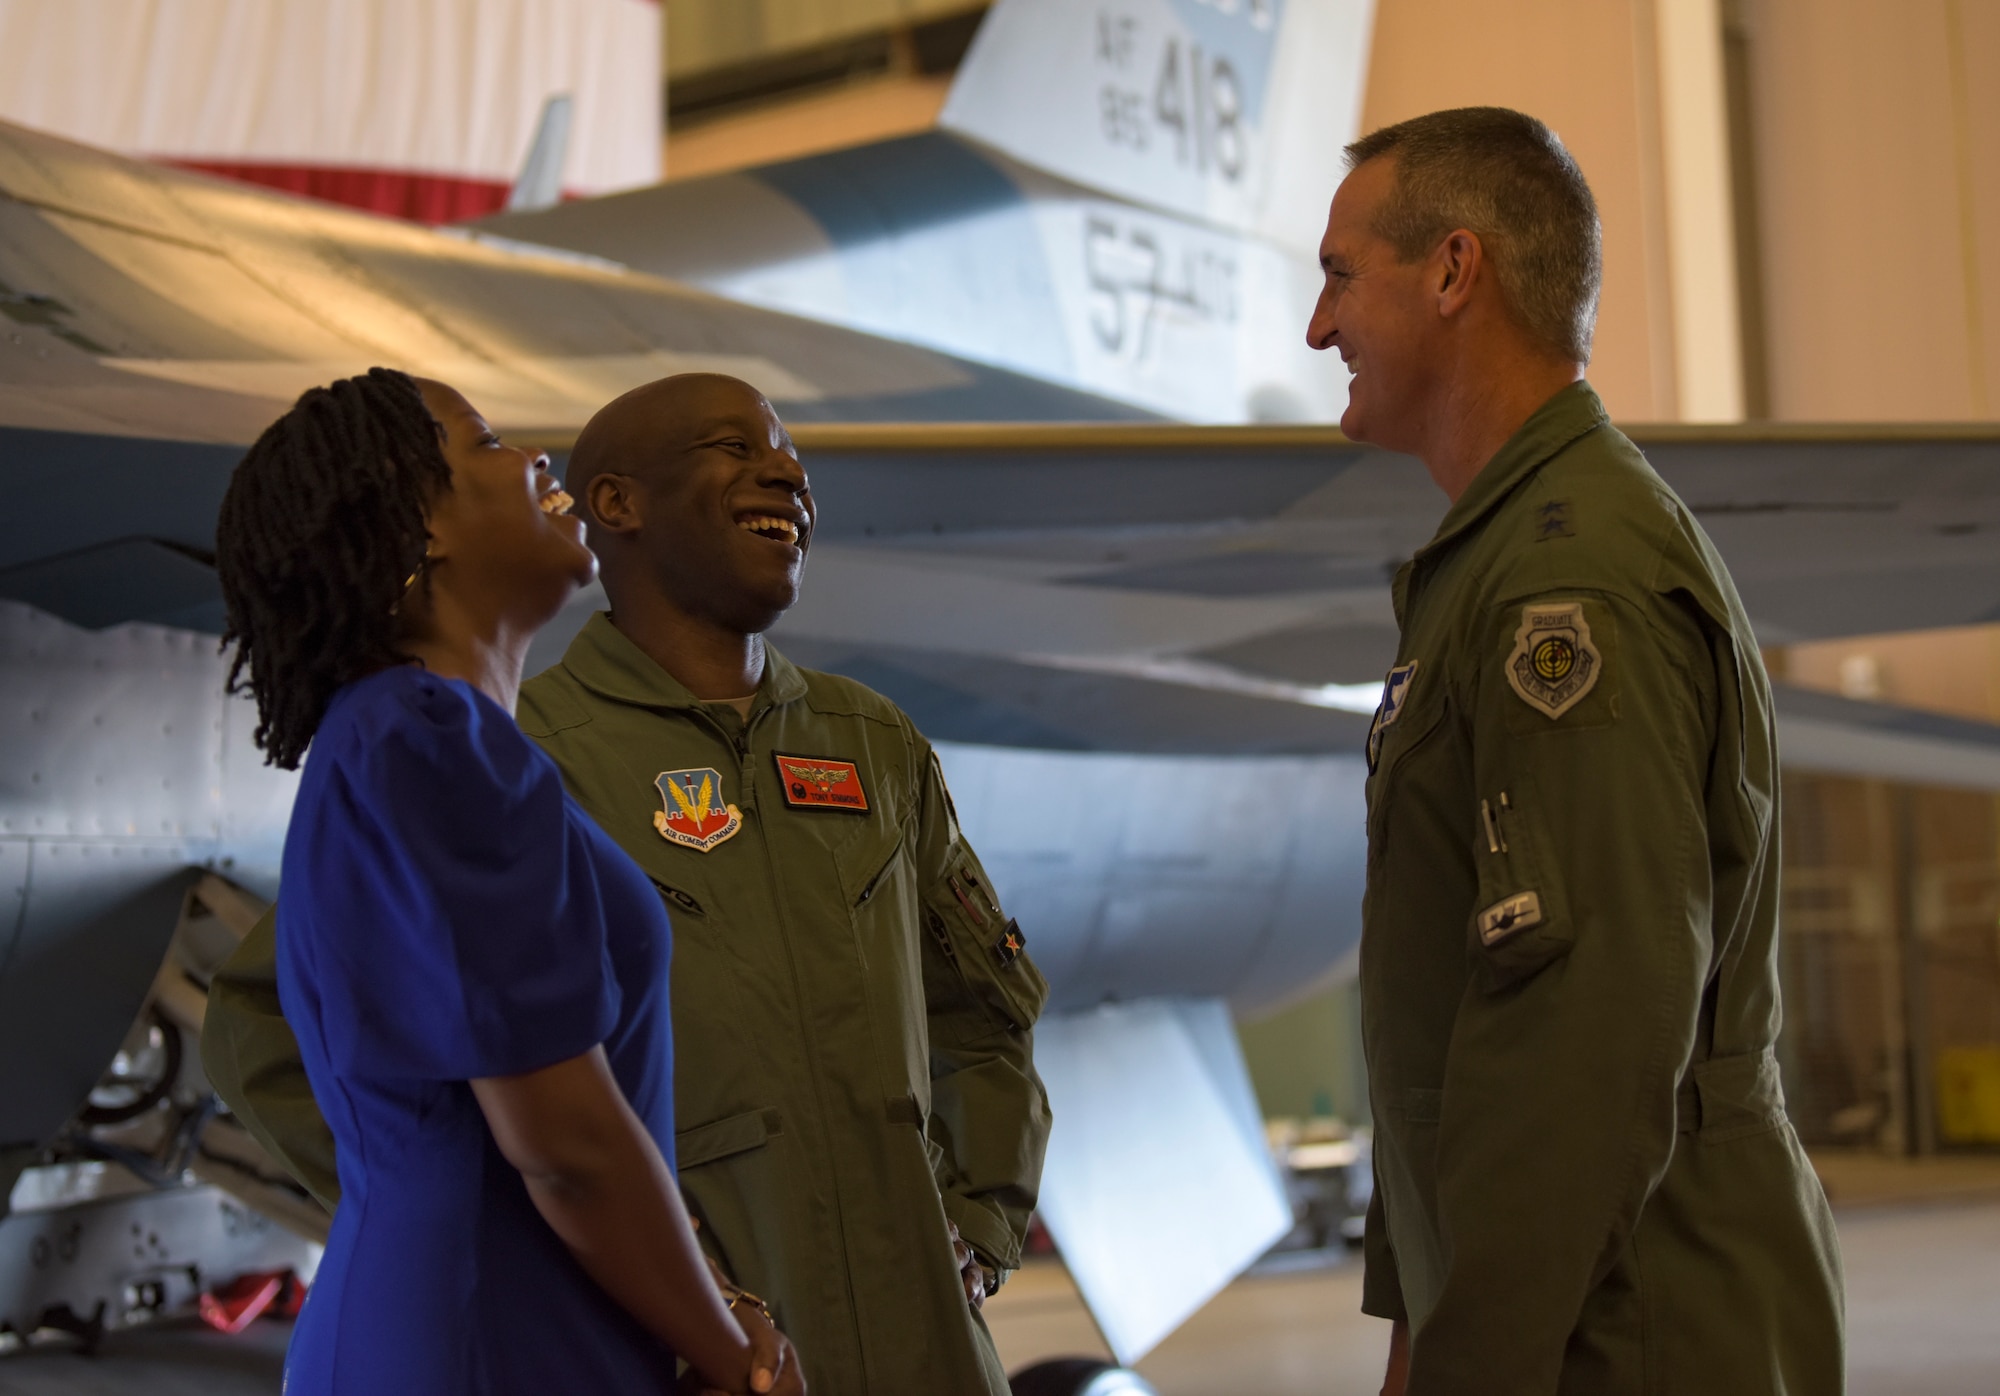 Maj. Gen. Peter Gersten, U.S. Air Force Warfare Center commander, greets Col. Travolis Simmons, 57th Advanced Tactics Group commander, and his wife, Mrs. Simmons, after a change of command ceremony at Nellis Air Force Base, Nevada, Aug. 8, 2018. The 57th ATG prepares the military to win our nation’s war by providing leaders who know, teach and replicate the enemy. (U.S. Air Force photo by Airman 1st Class Andrew D. Sarver)